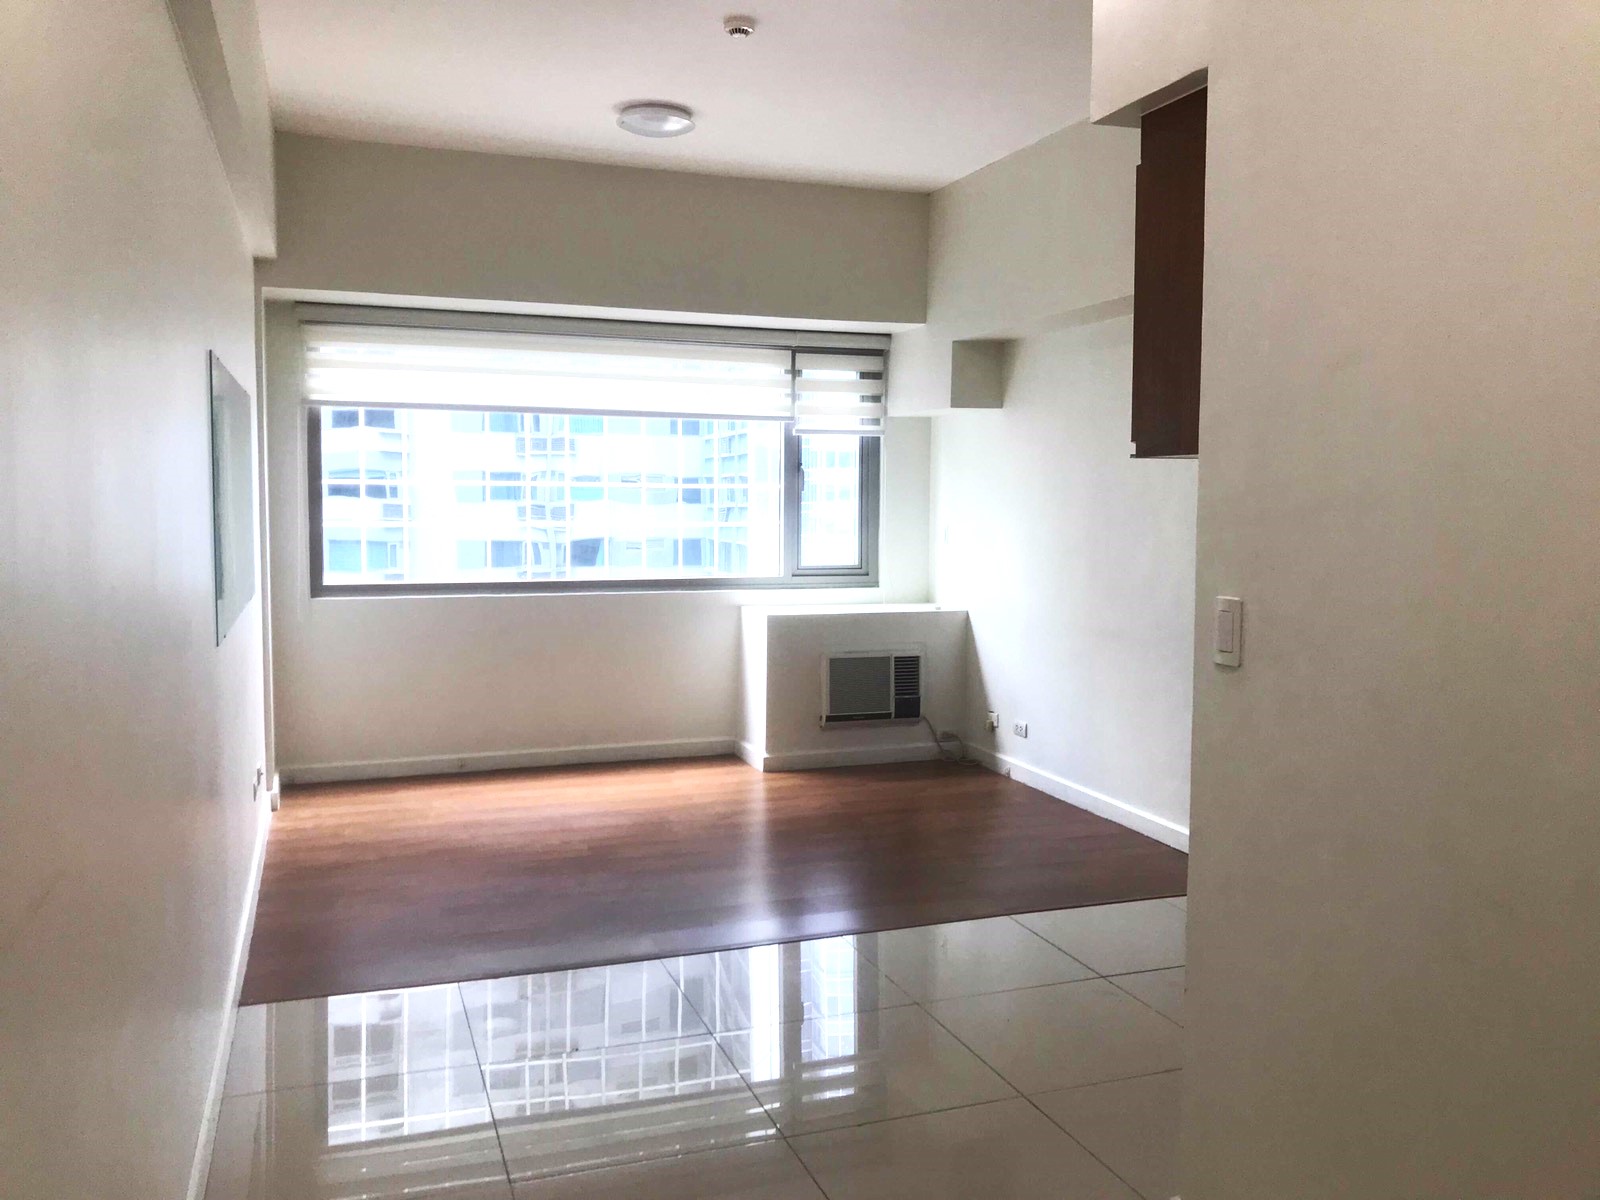 Unfurnished Studio Type Condo at Eton Tower Makati For Rent